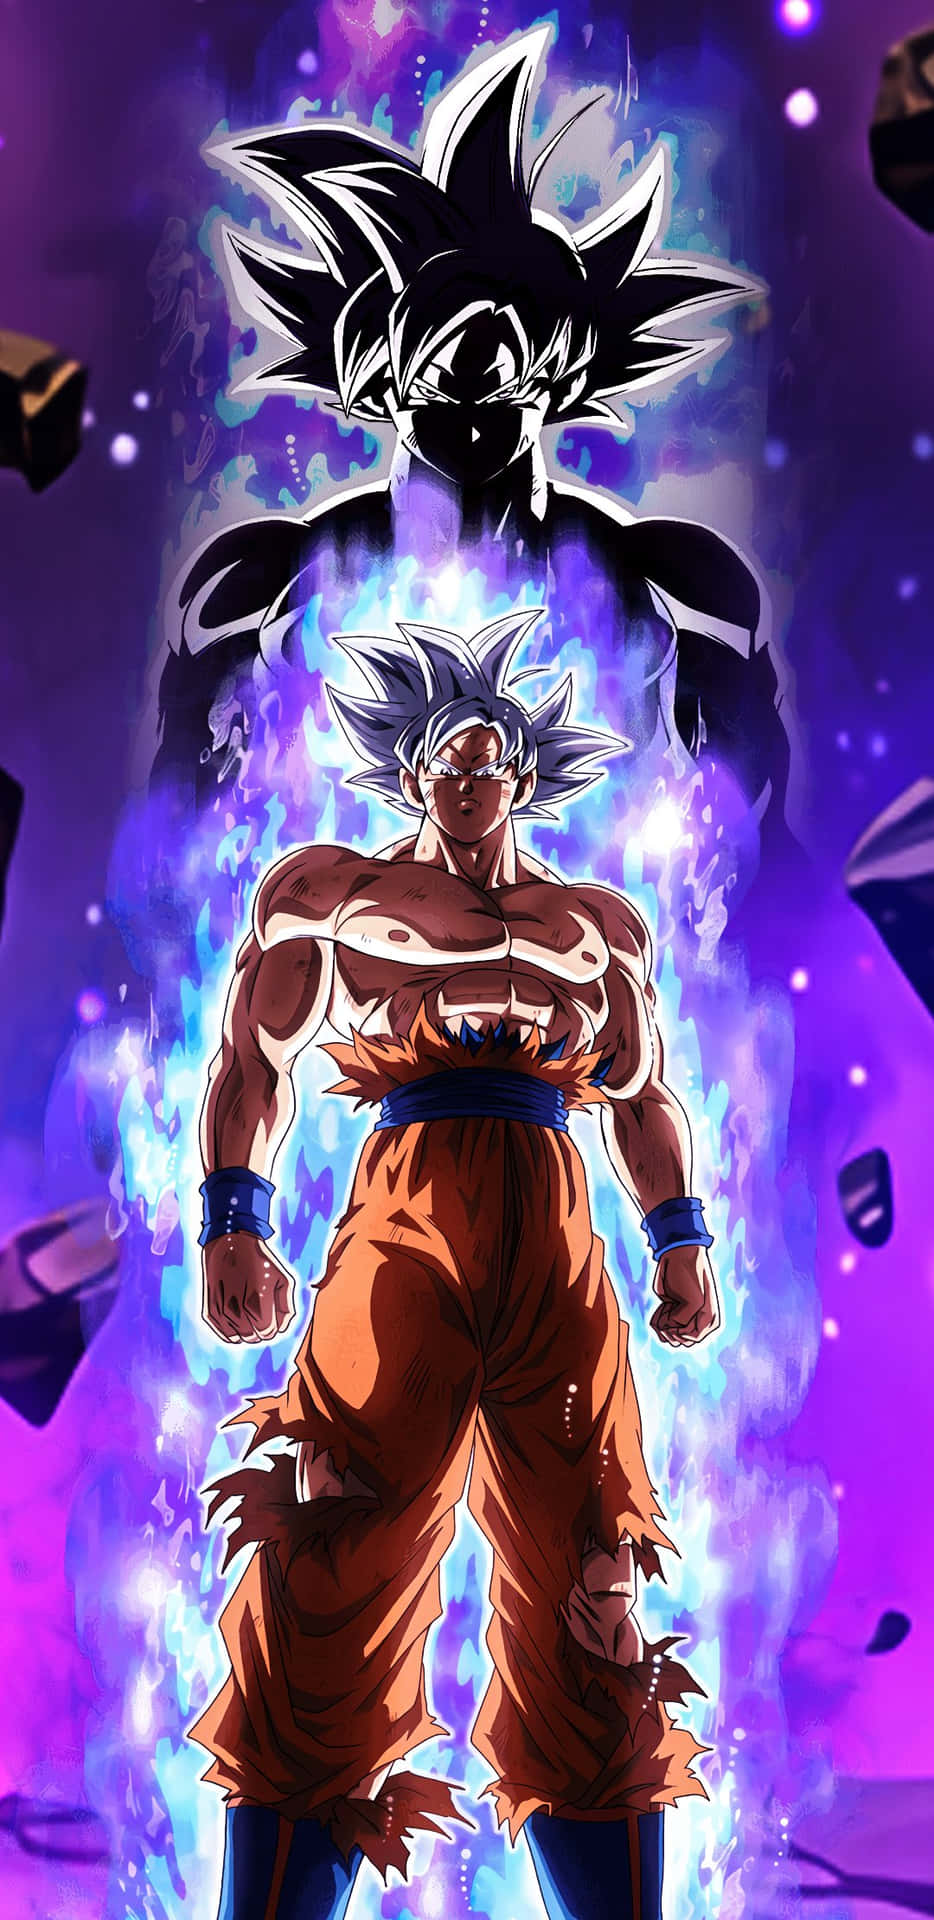 "Goku harnesses the power of Ultra Instinct for an incredible transformation"